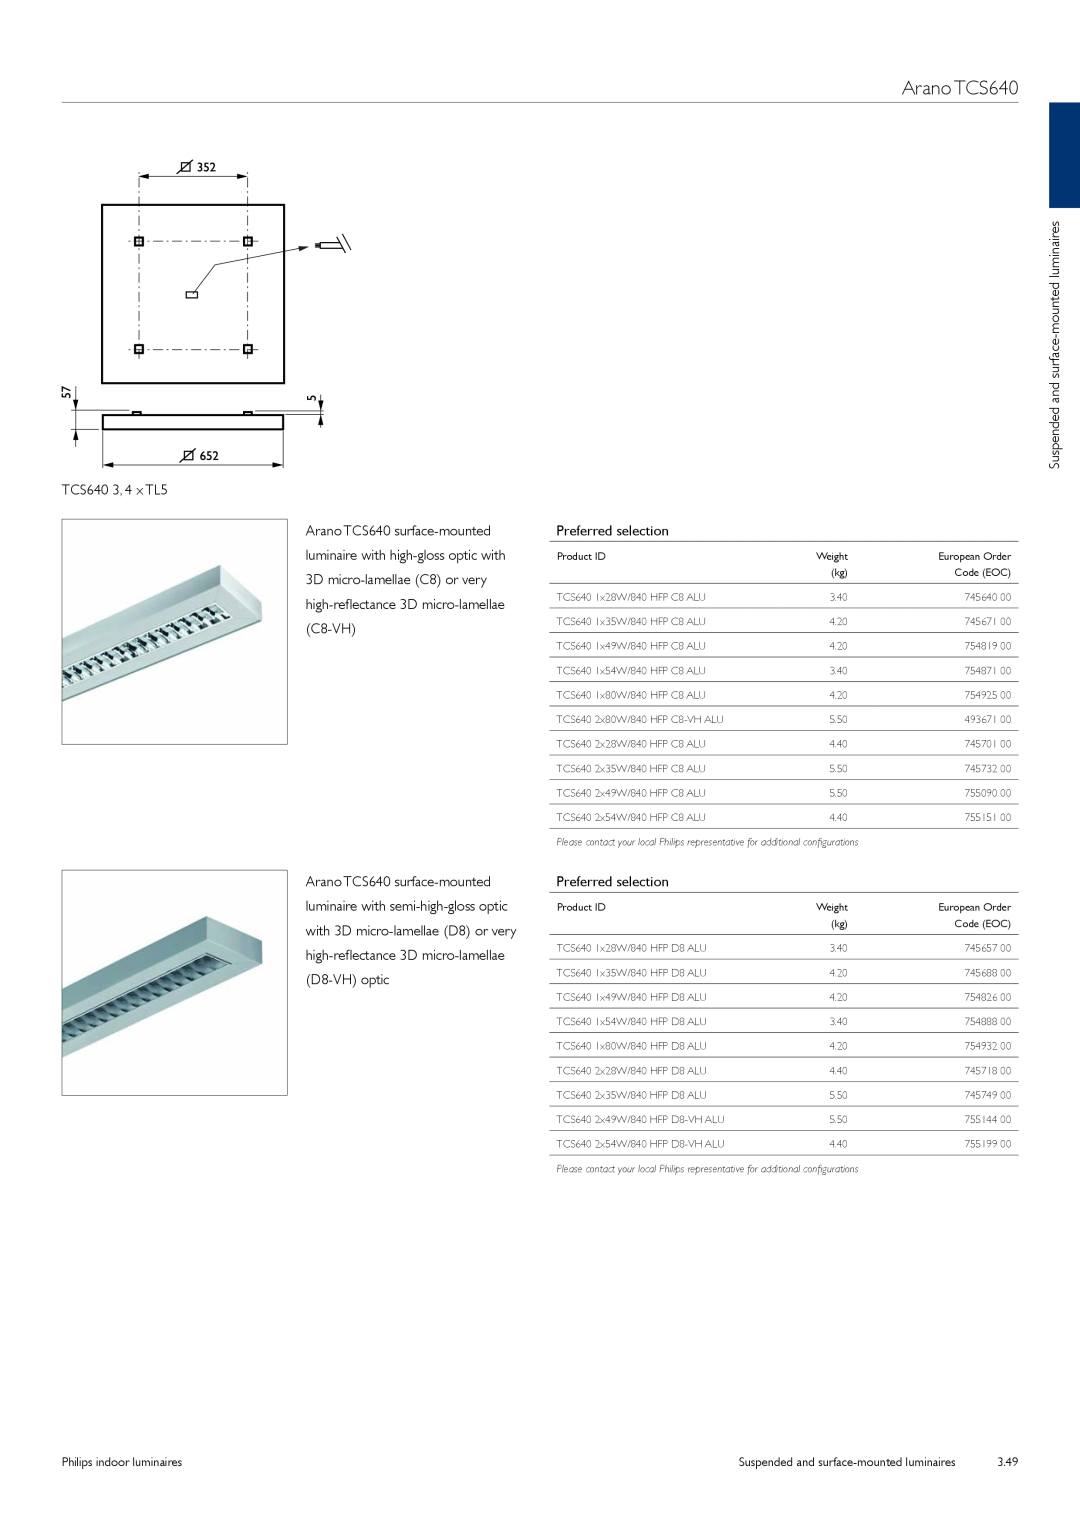 Philips TCS125 manual Arano TCS640, TCS640 3, 4 x TL5, Suspended and surface-mountedluminaires, Preferred selection, 3.49 